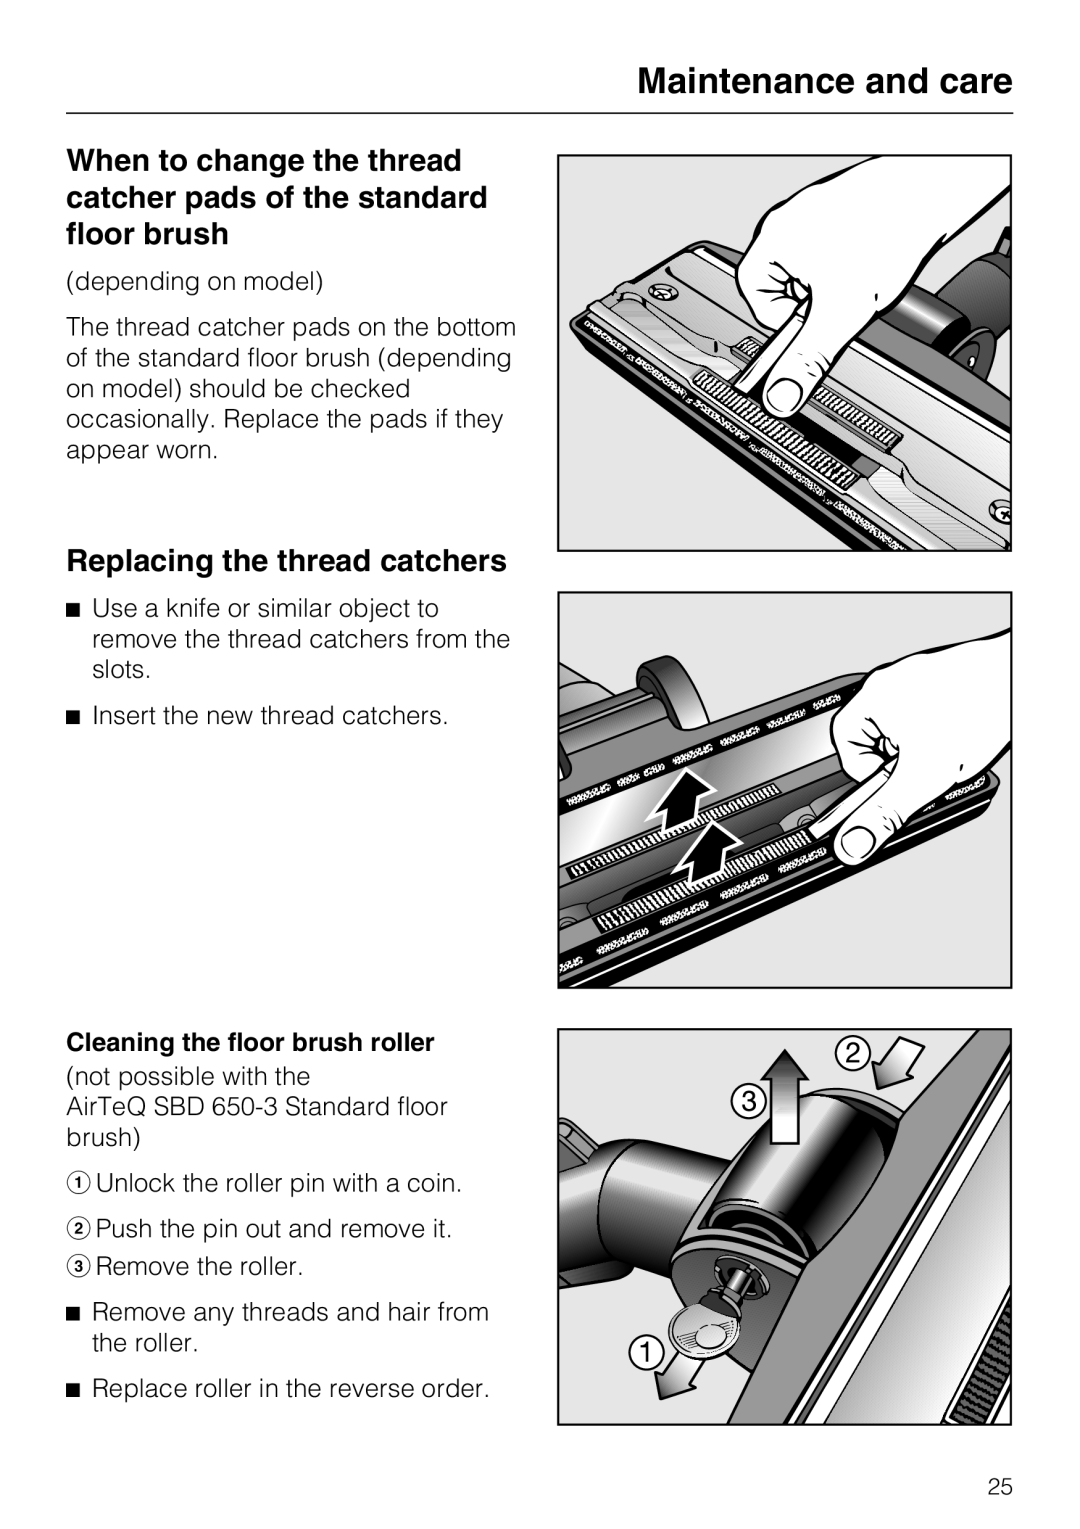 Miele S 6000 operating instructions Maintenance and care, Replacing the thread catchers, Cleaning the floor brush roller 